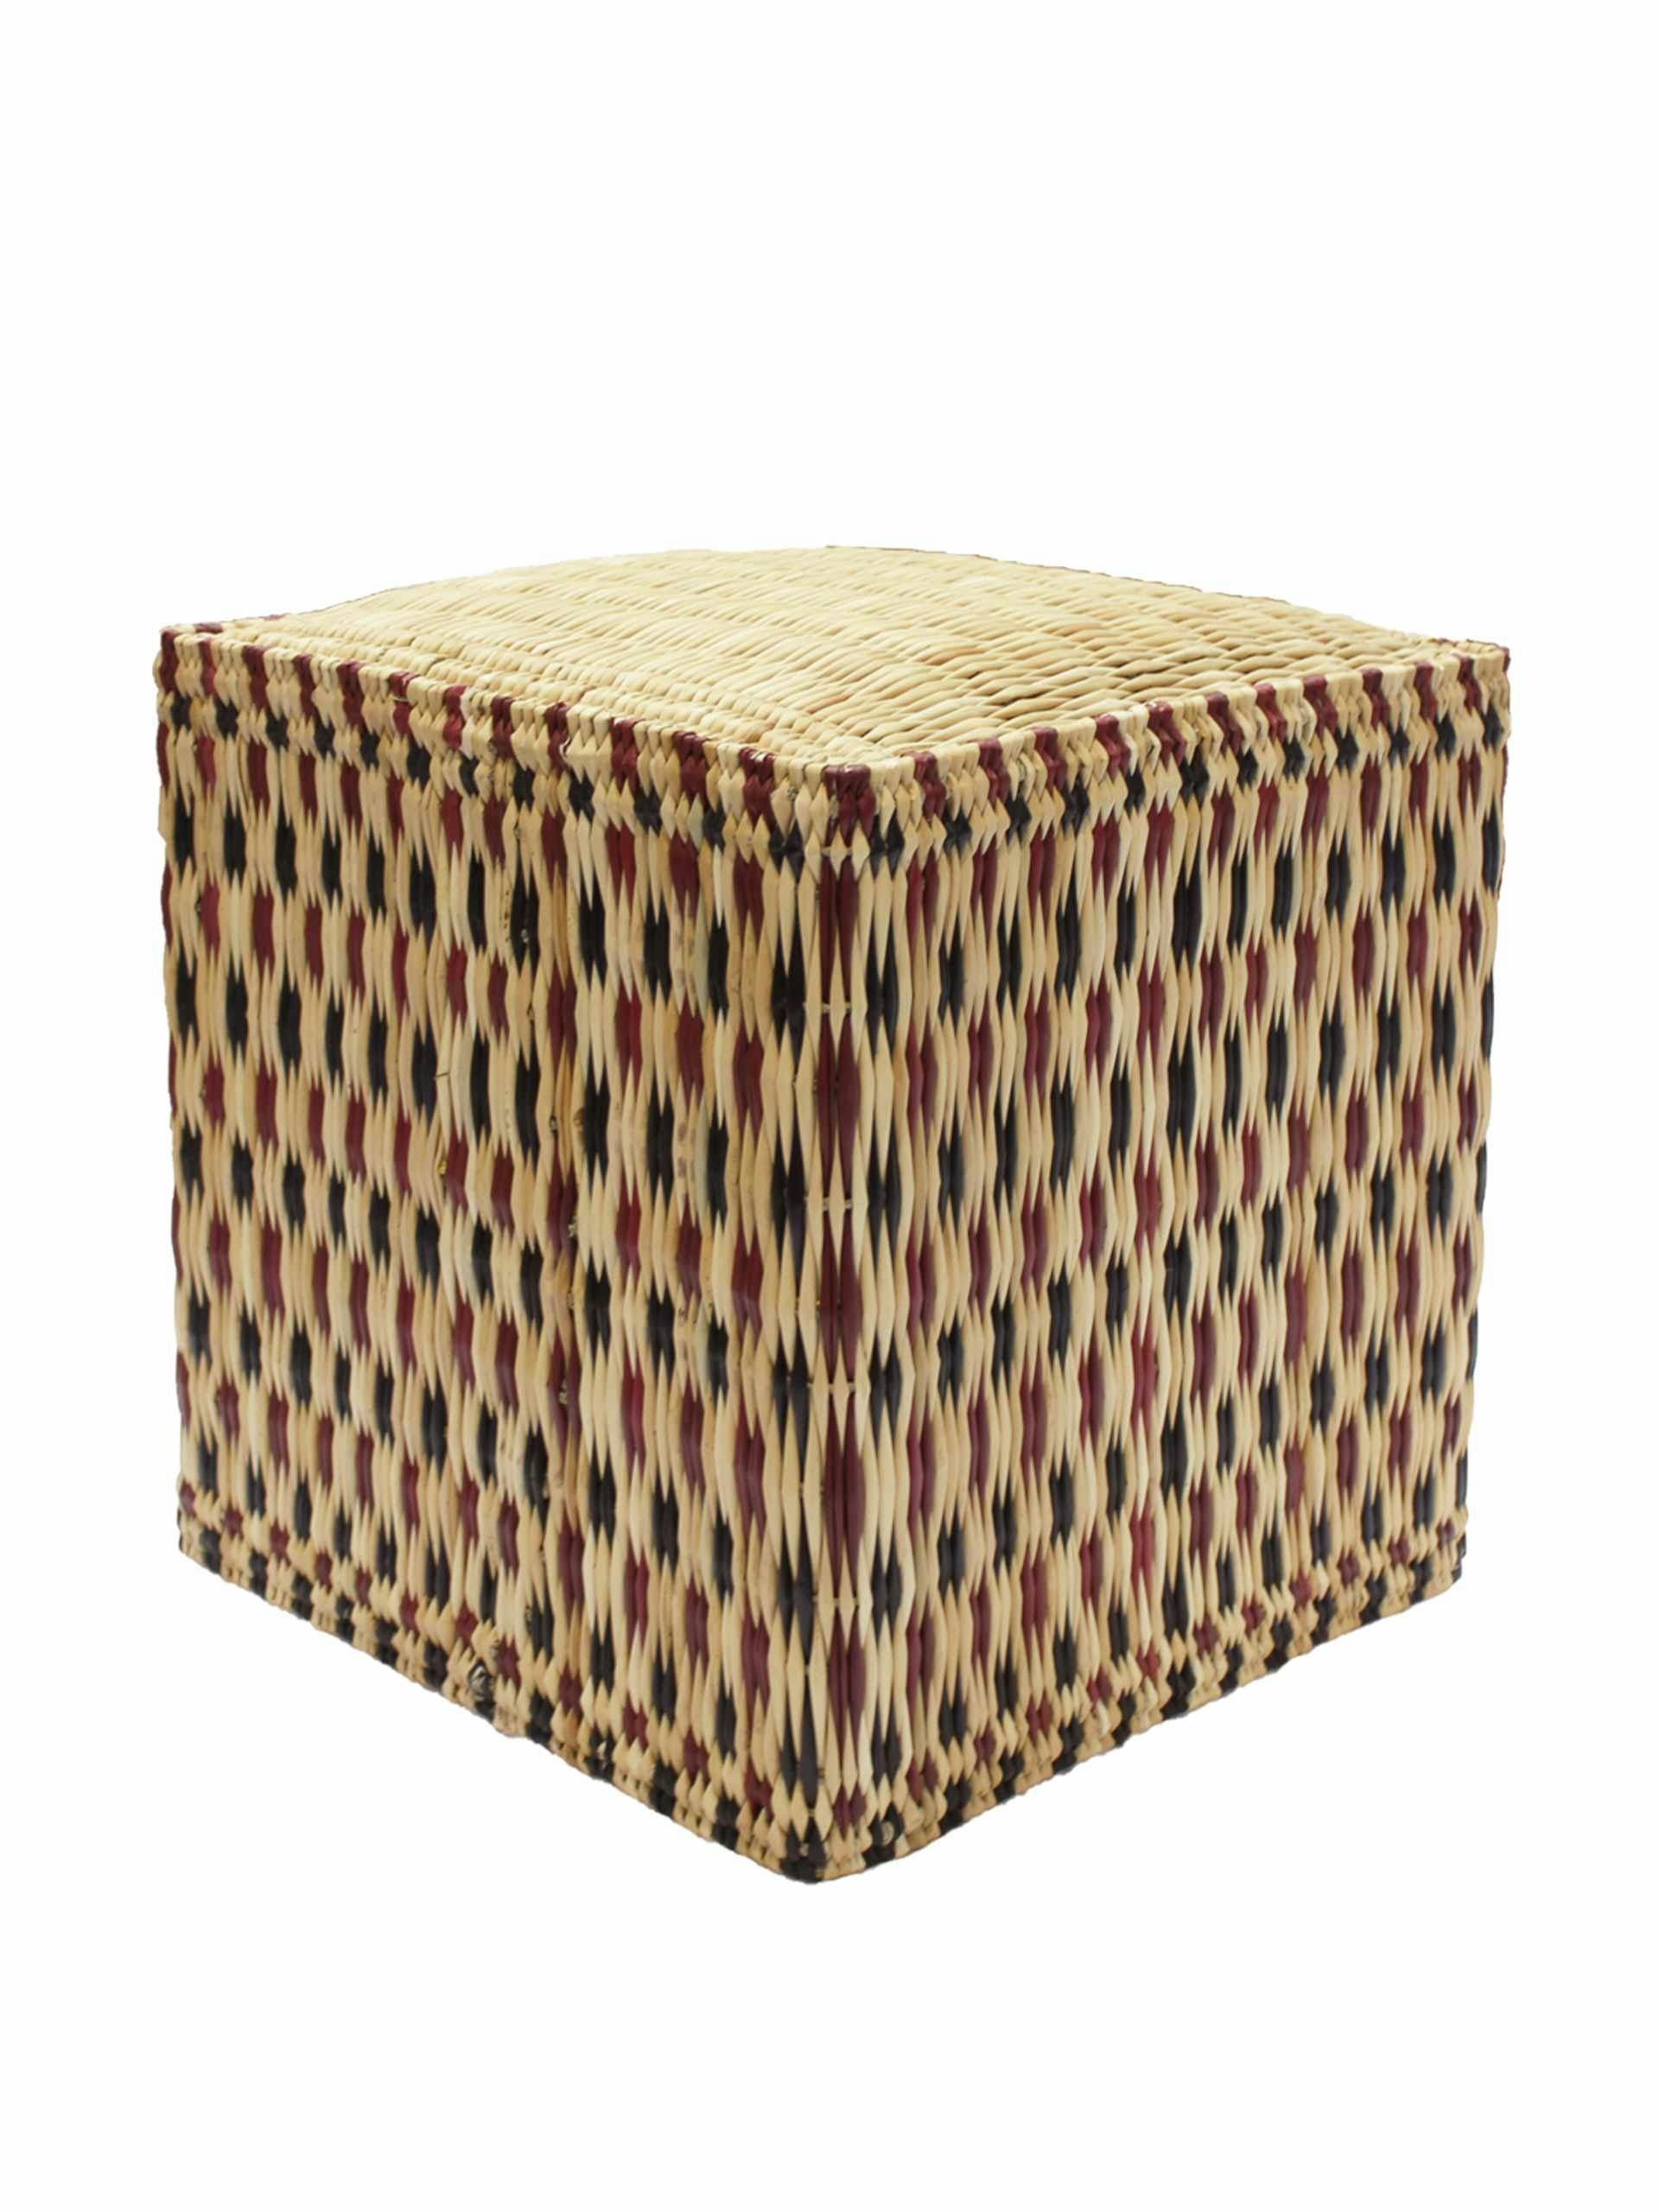 Dotted wicker stool